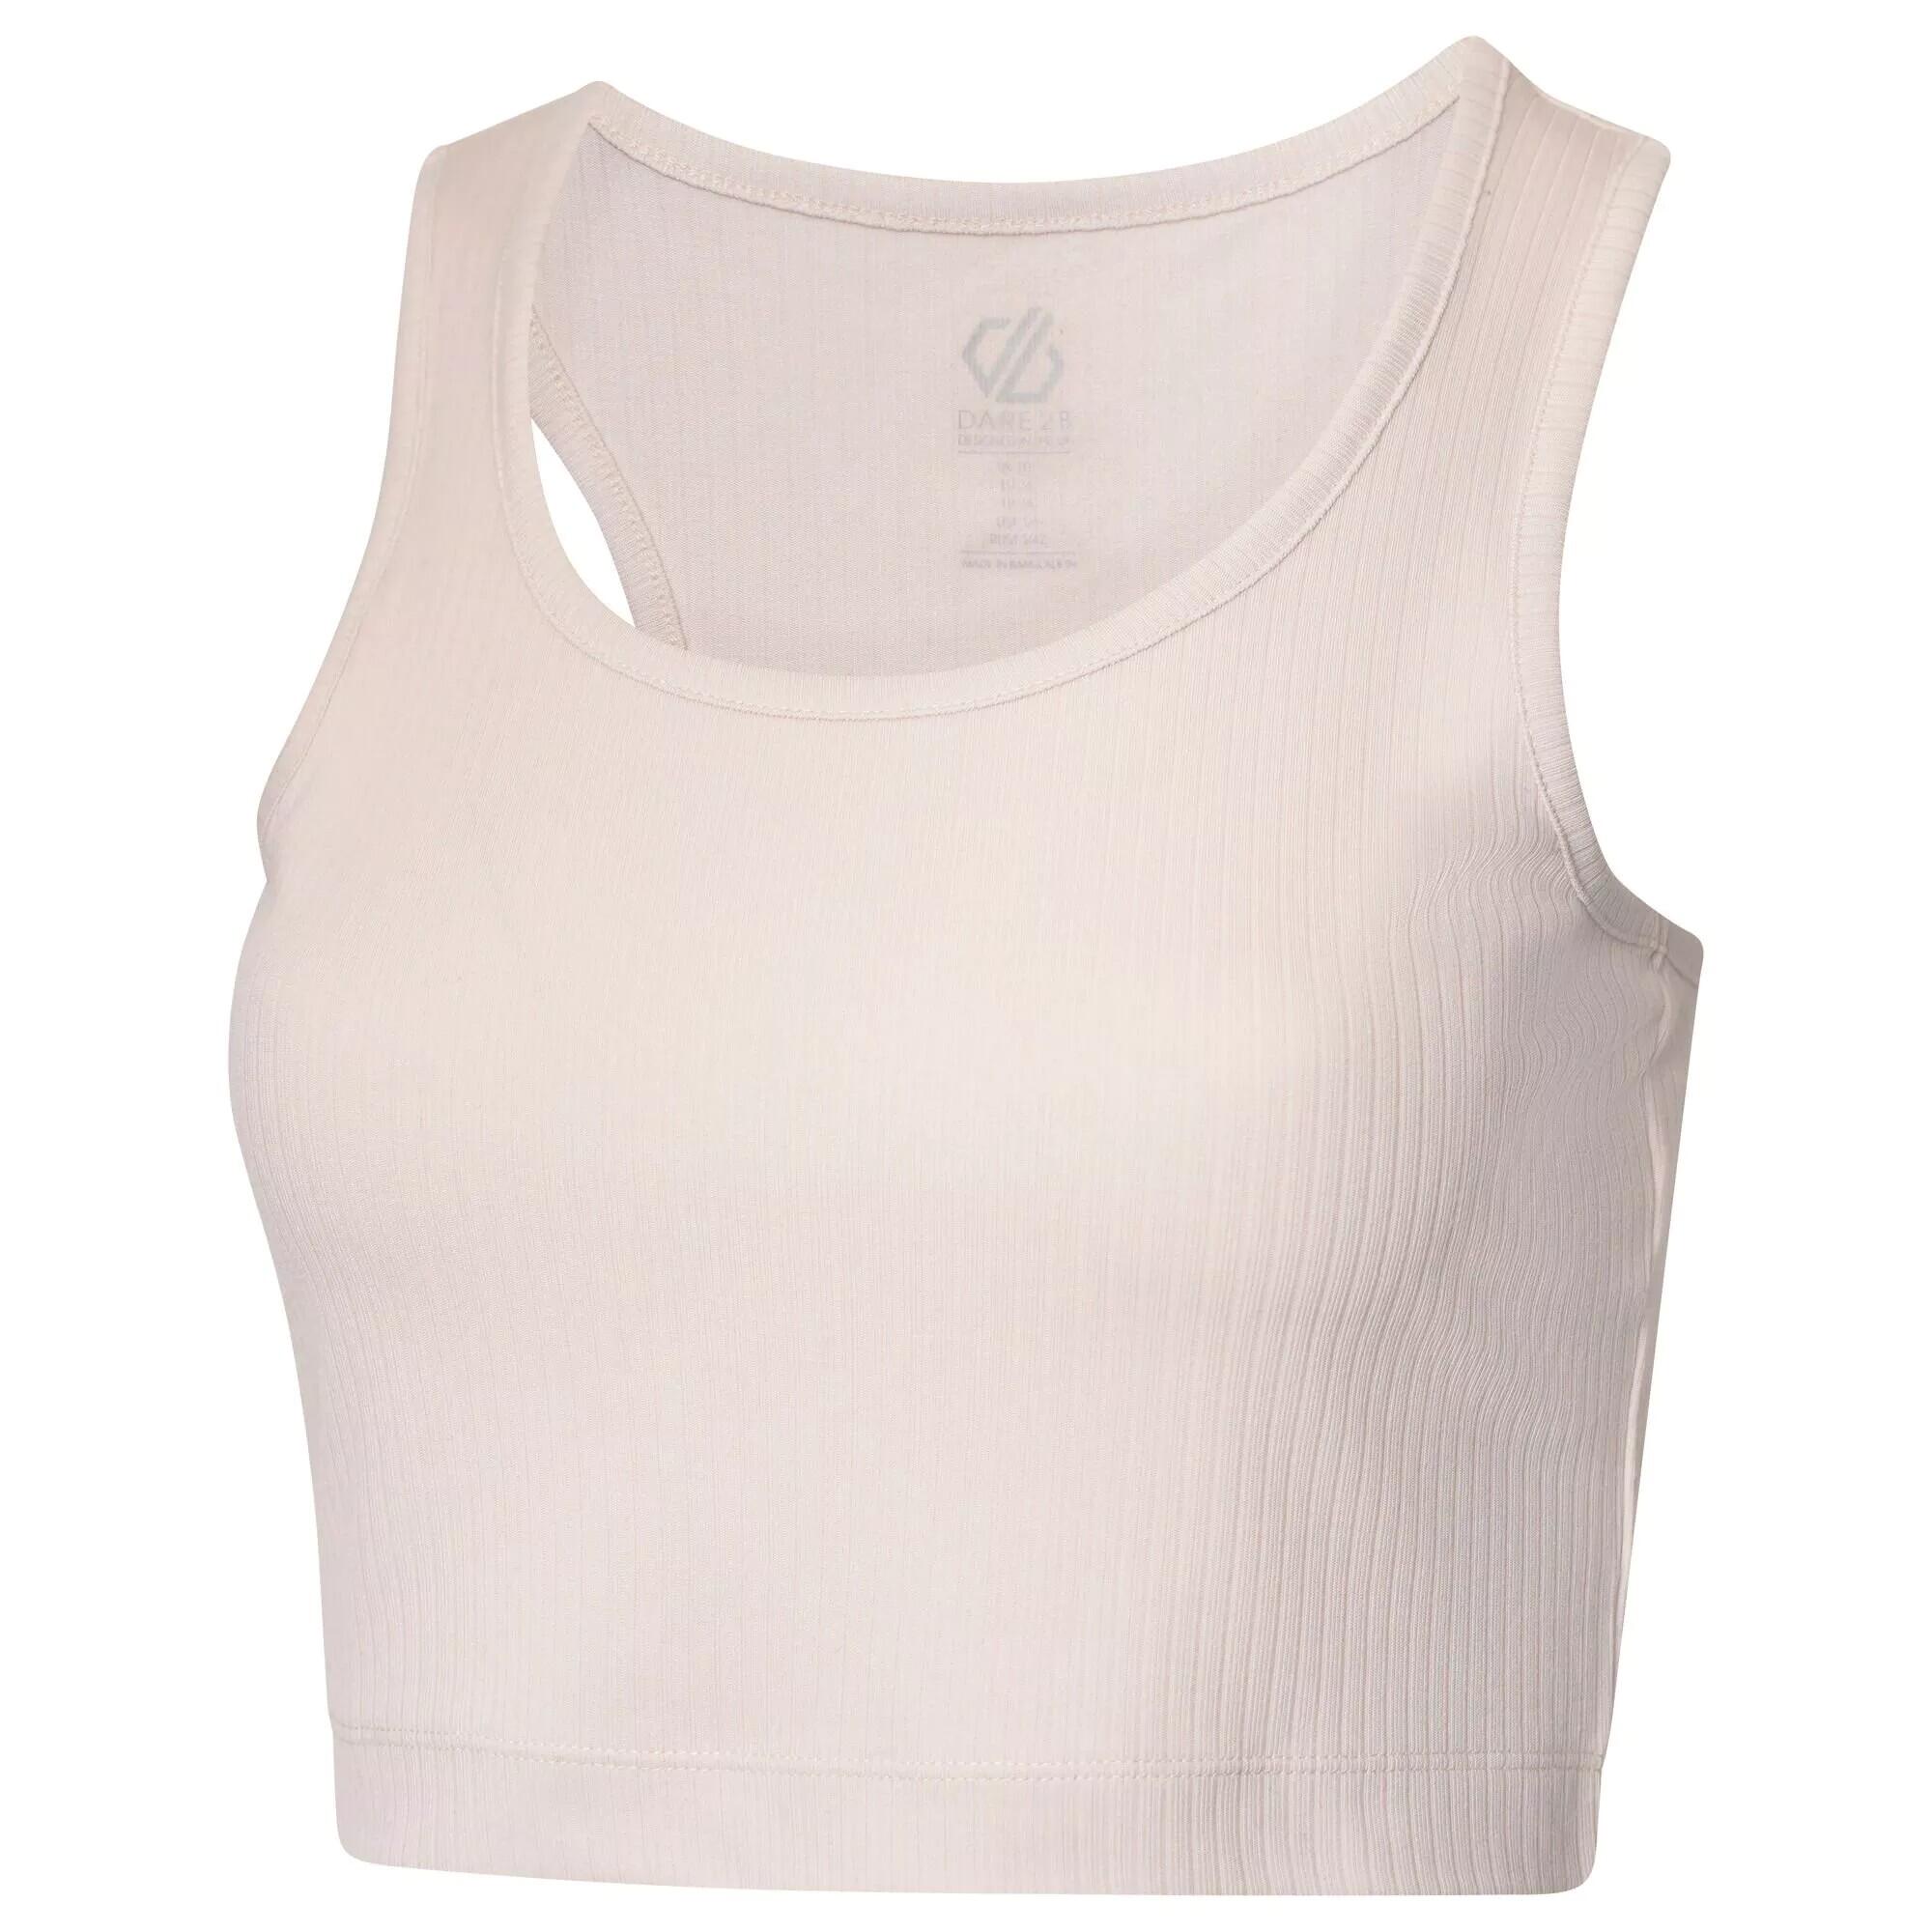 Womens/Ladies Lounge About Crop Top (Barley White) 3/5